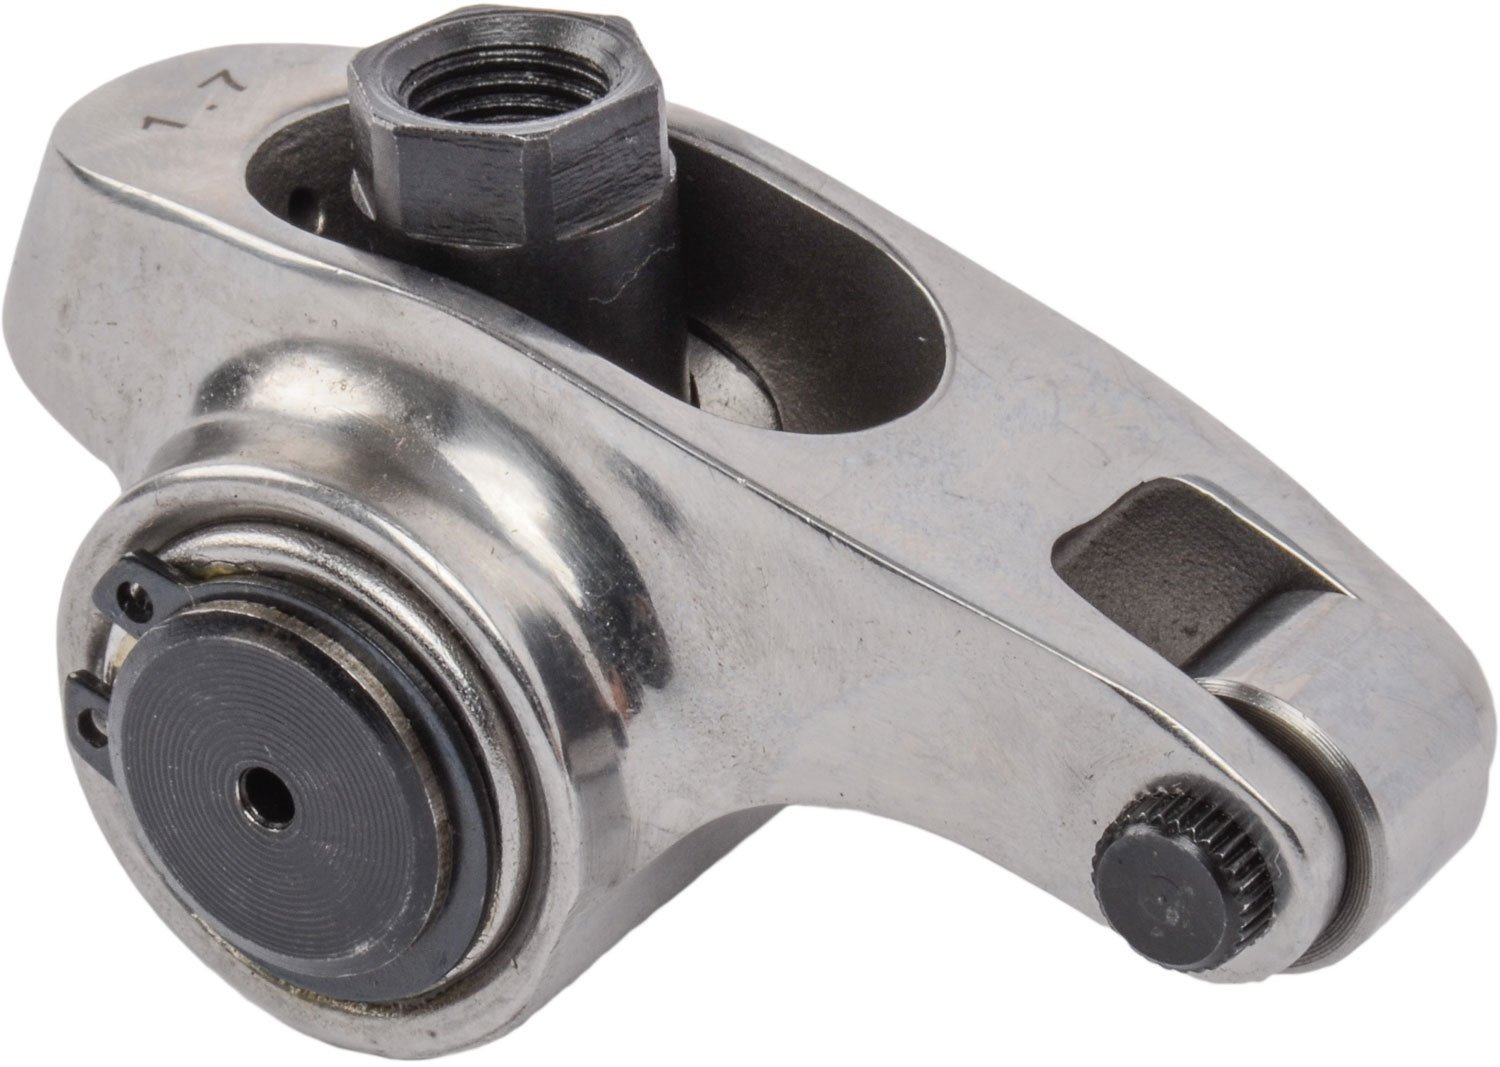 Stainless Steel Rocker Arms for Chevy LS